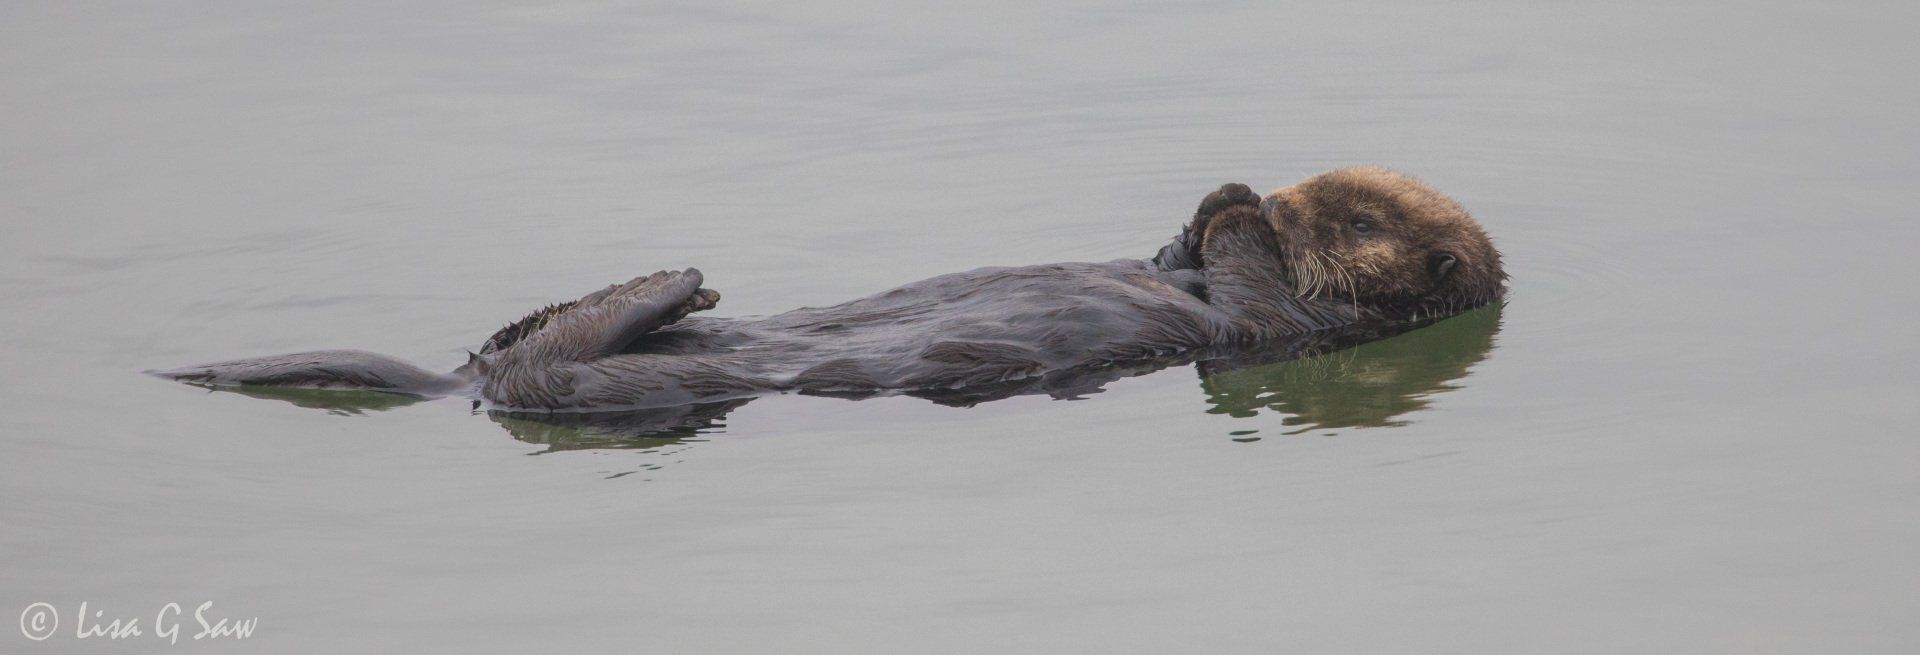 Sea Otter floating on its back with paws together